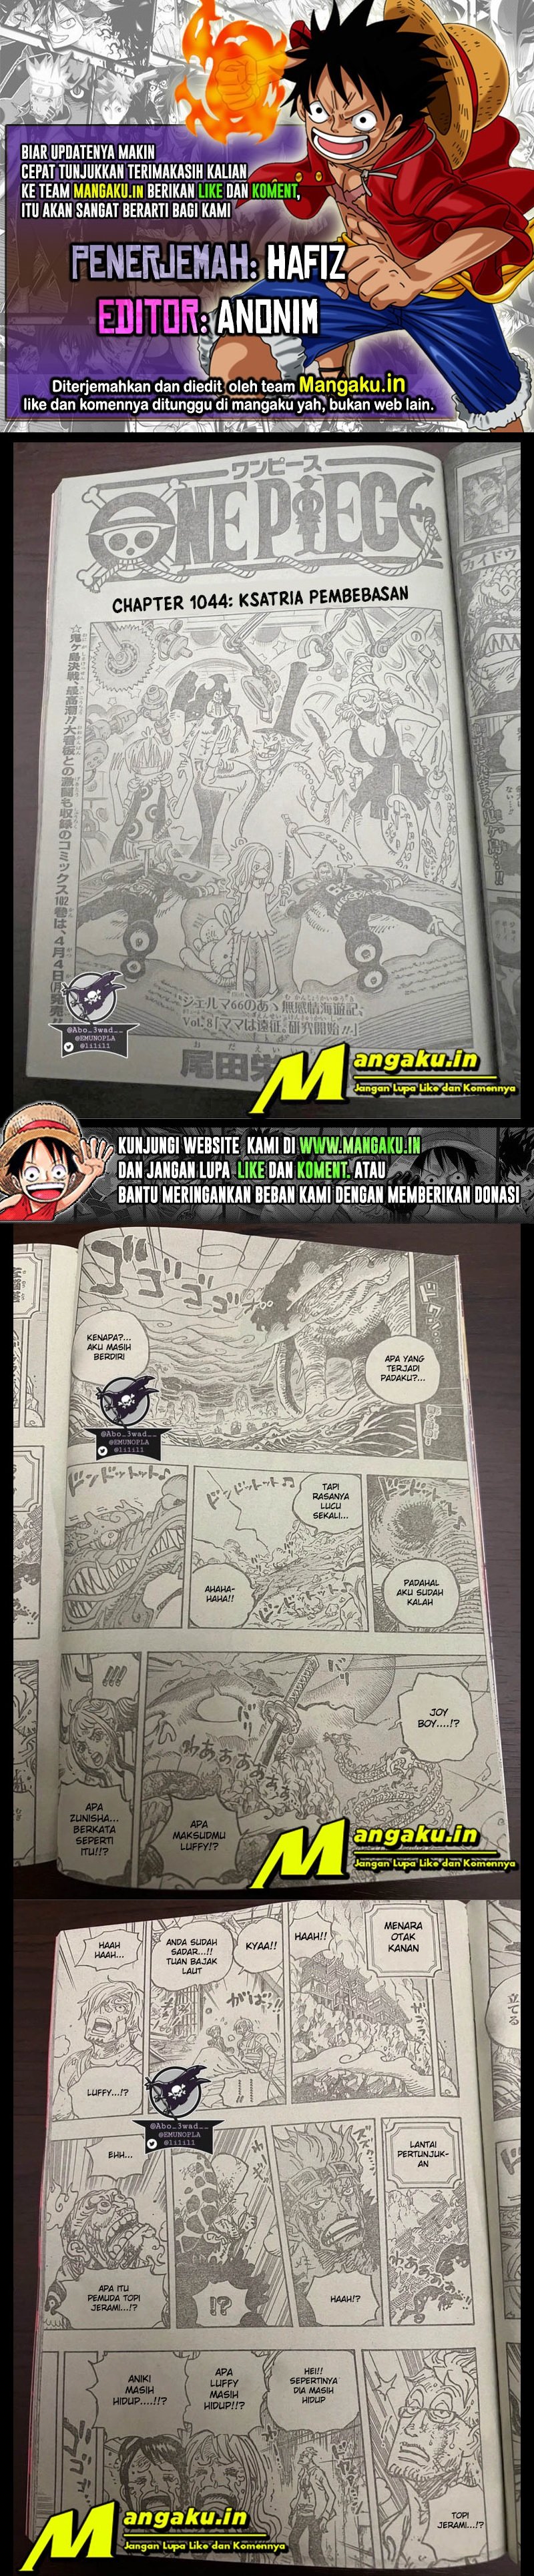 One Piece Chapter 1044 lq